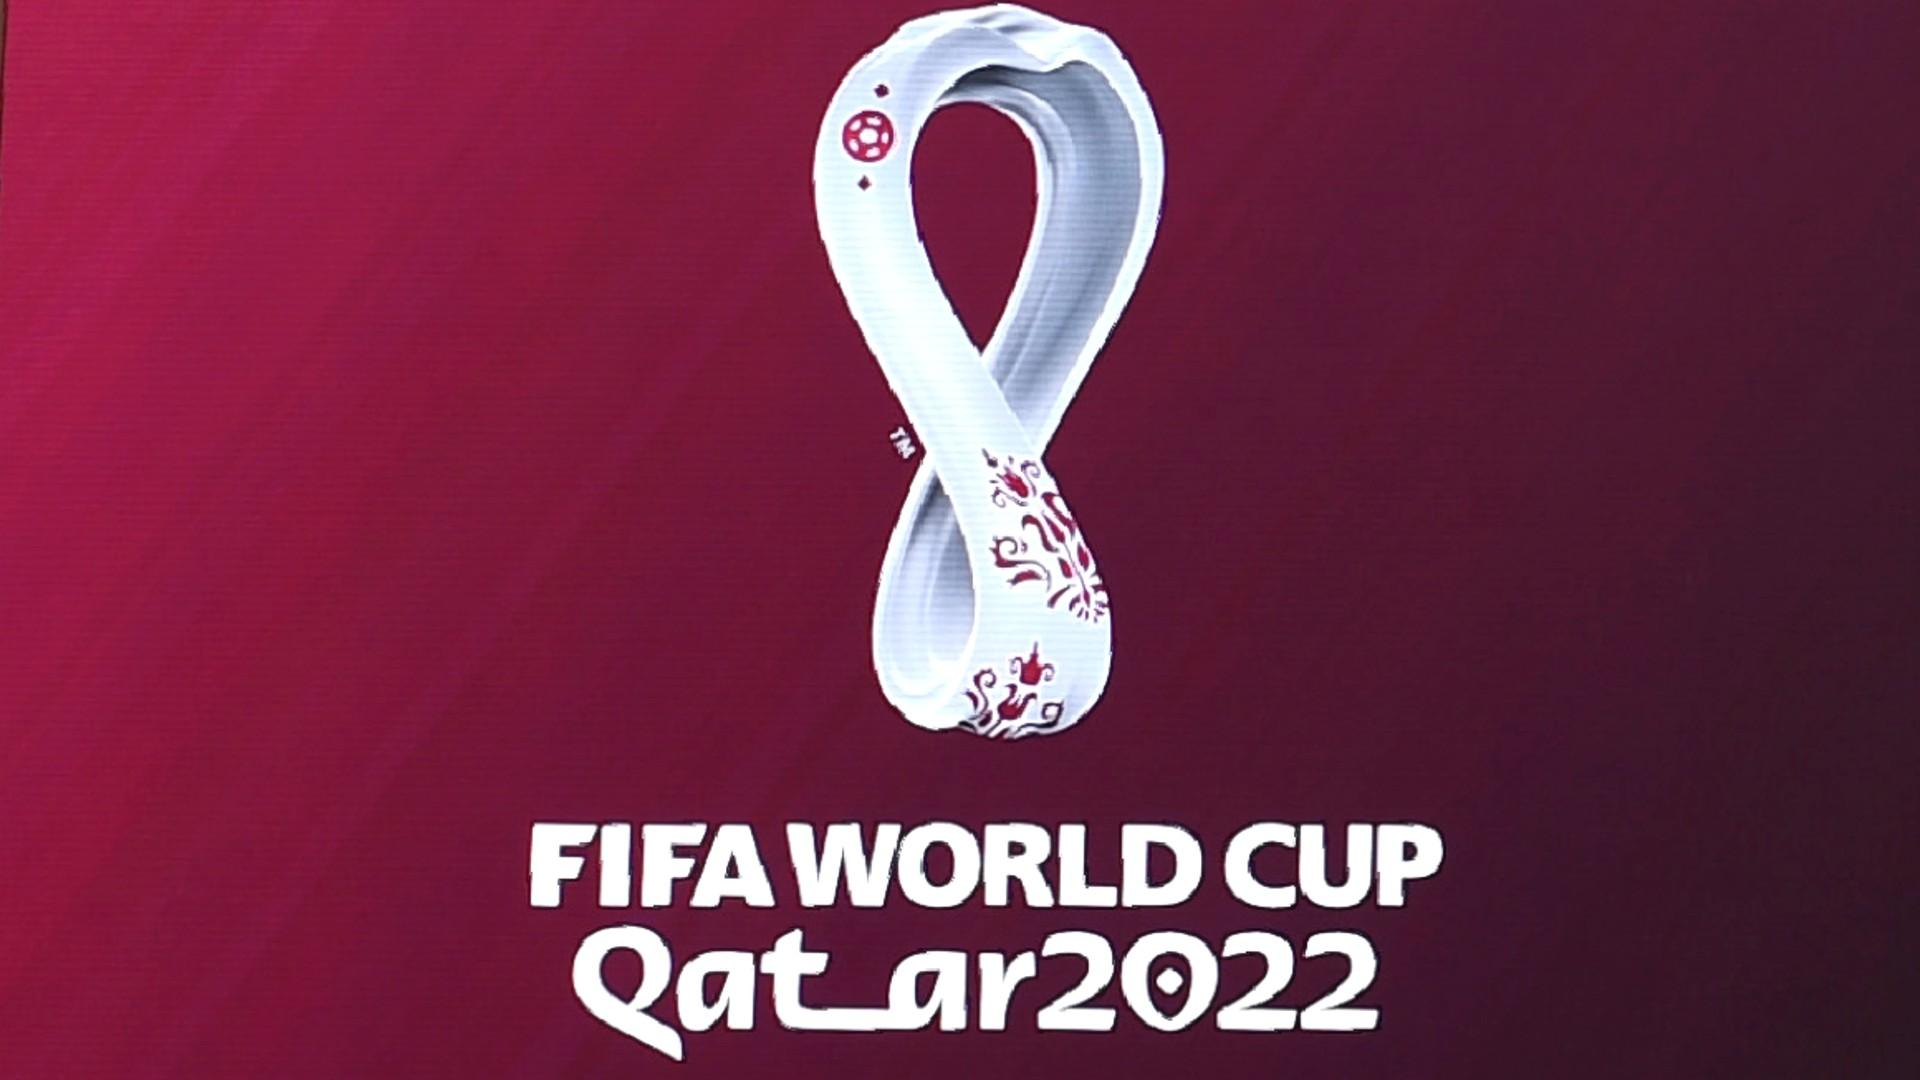 People have to pay to watch FIFA World Cup 2022